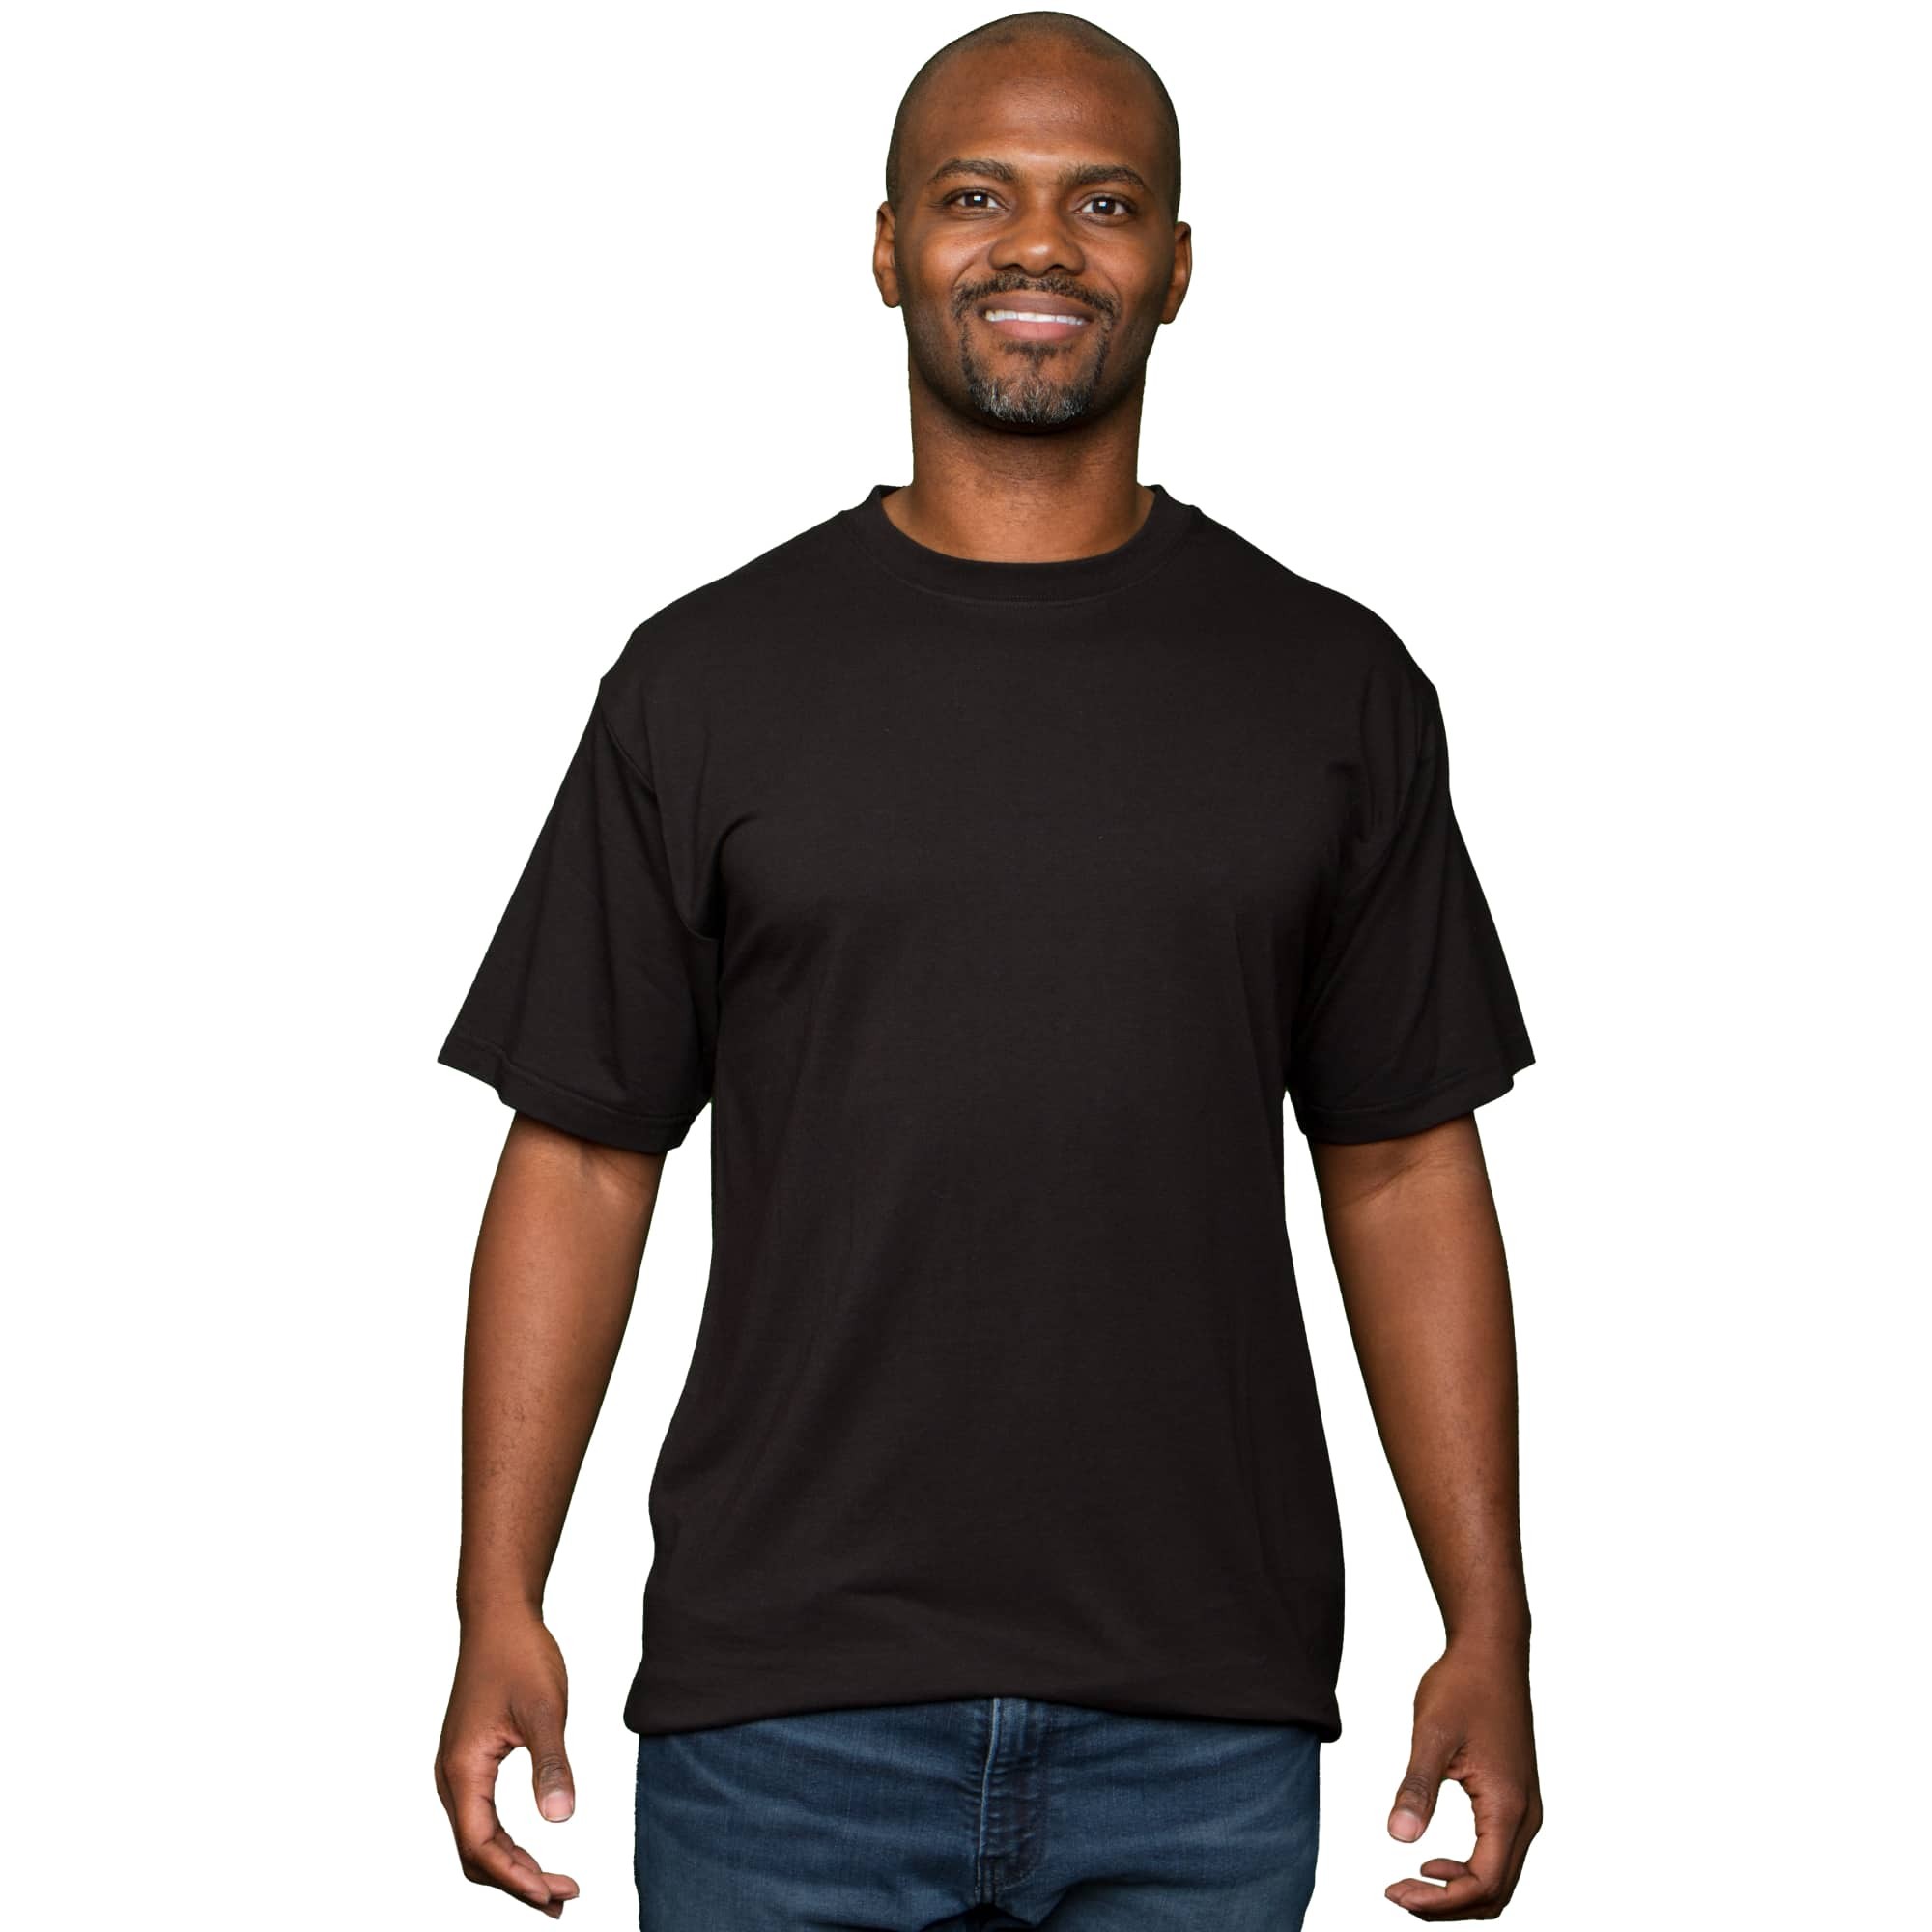 You're going to love Big Boy Bamboo incredibly durable bamboo t-shirts